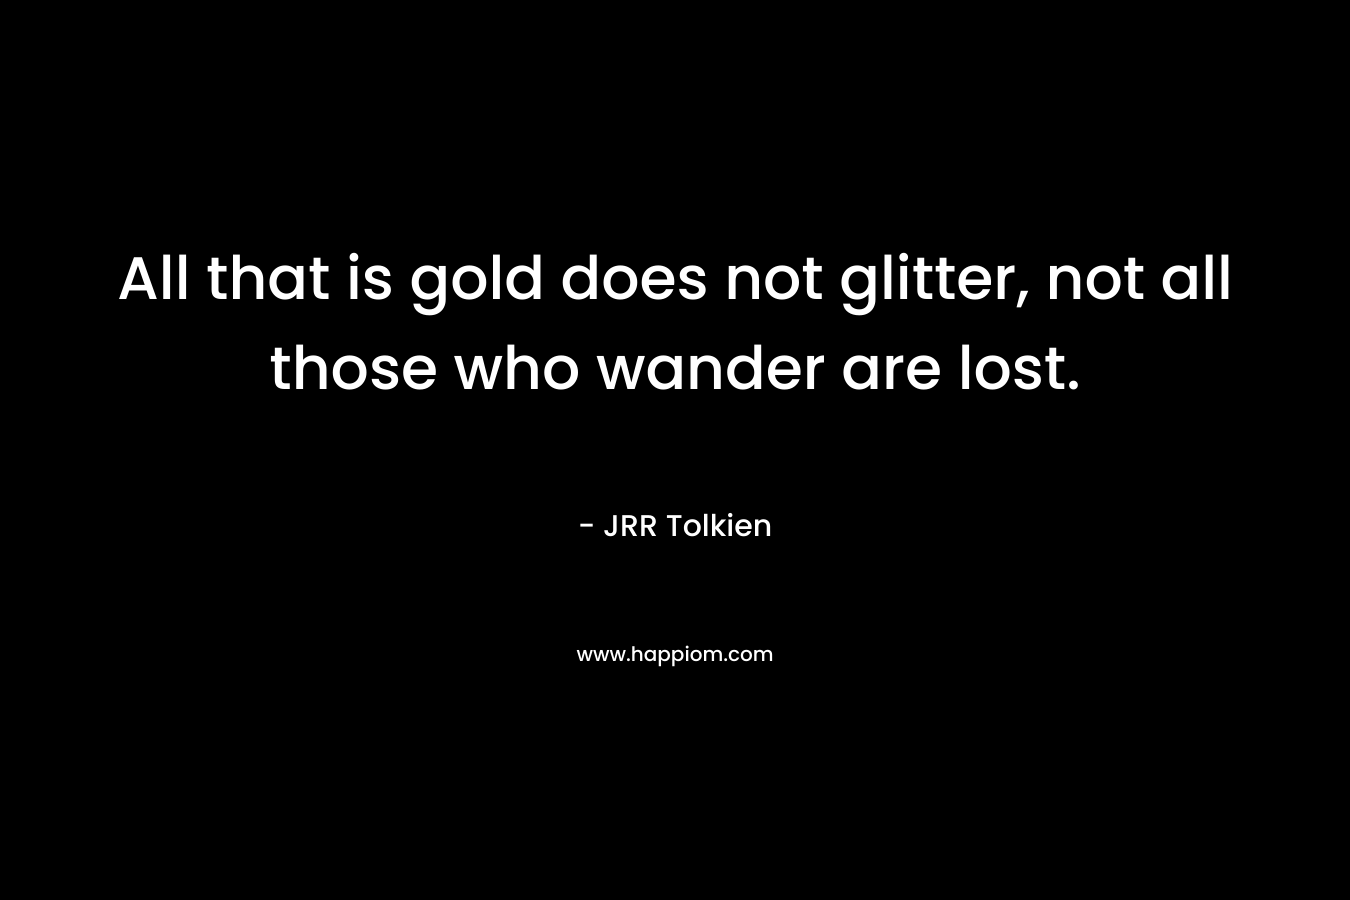 All that is gold does not glitter, not all those who wander are lost.